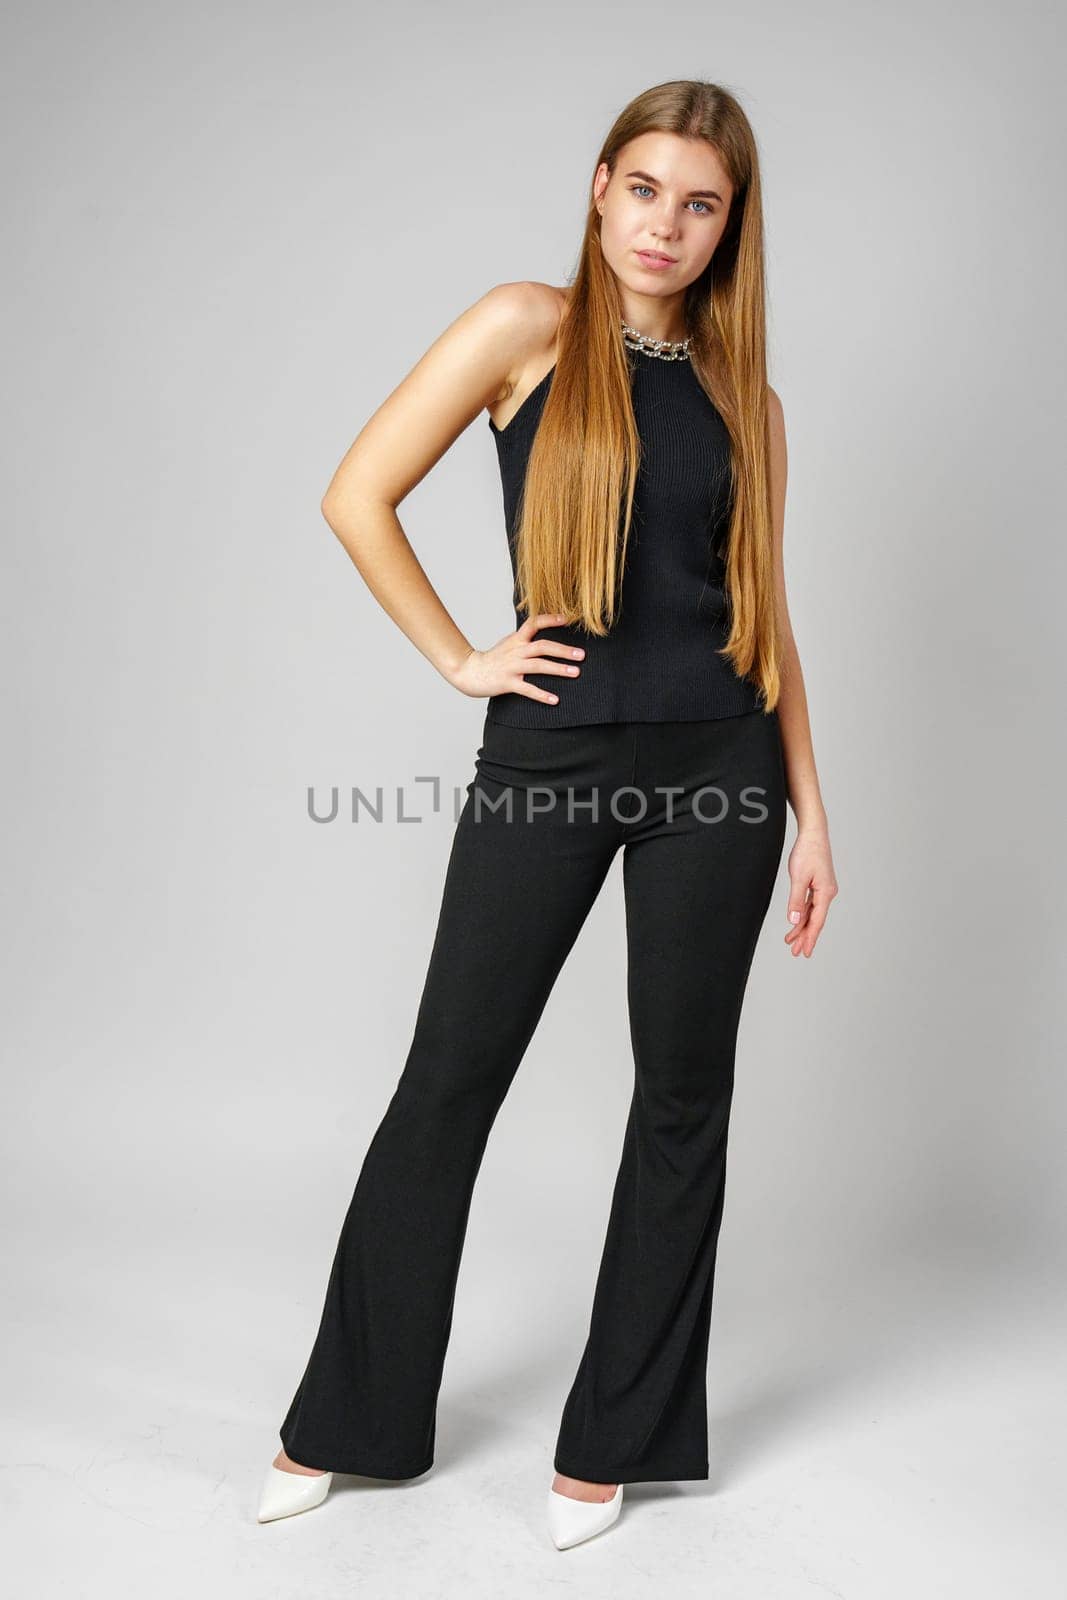 Young Woman With Long Hair in Black Pants and Top